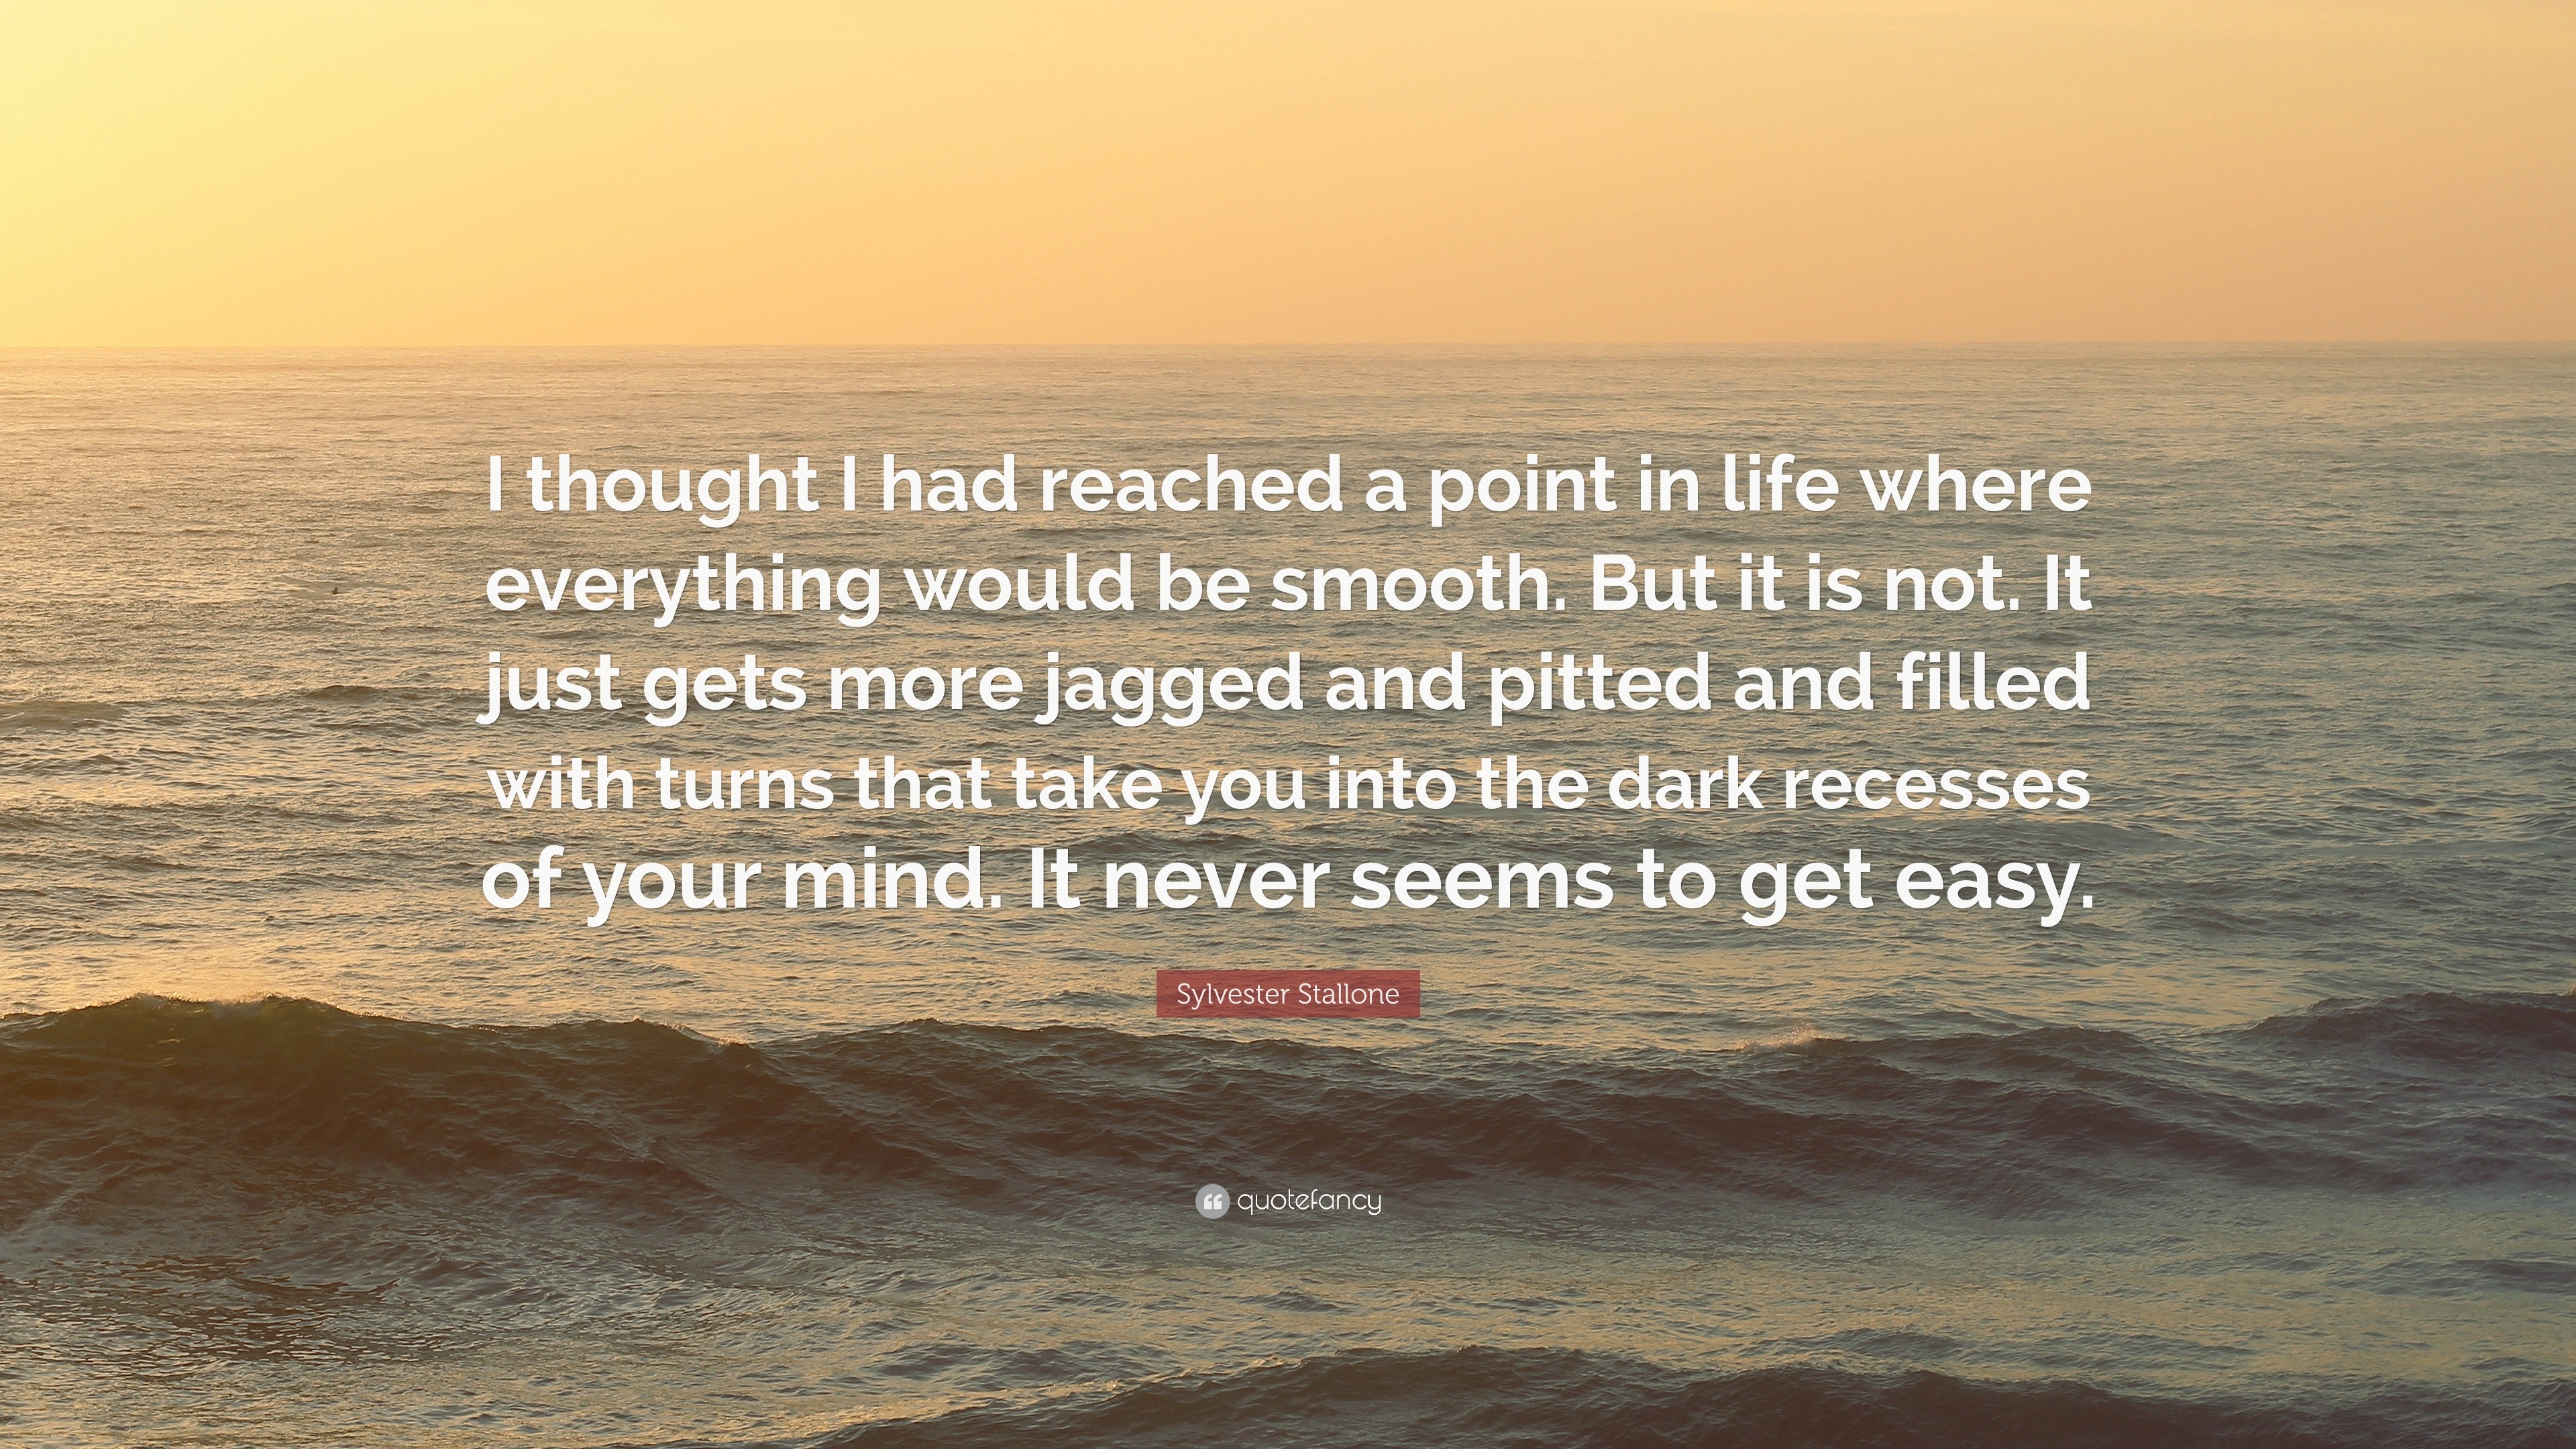 Sylvester Stallone Quote: “I thought I had reached a point in life ...